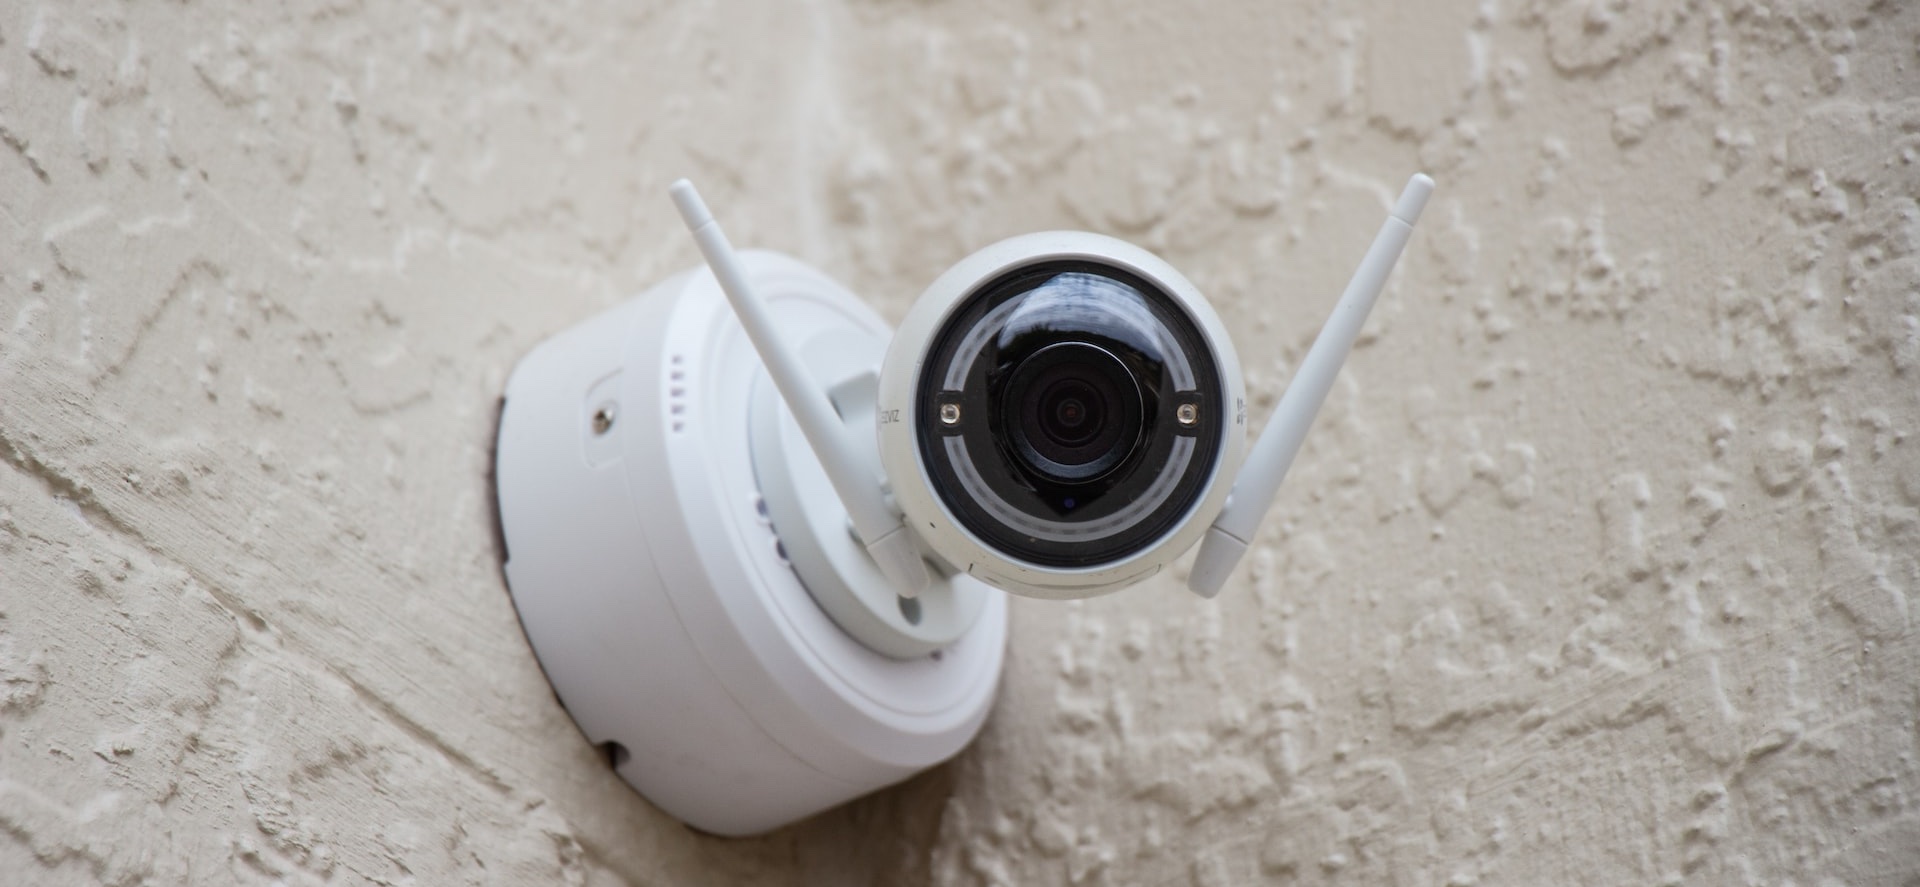 The Eufy Security Camera Privacy Scandal: Unencrypted Cloud Footage